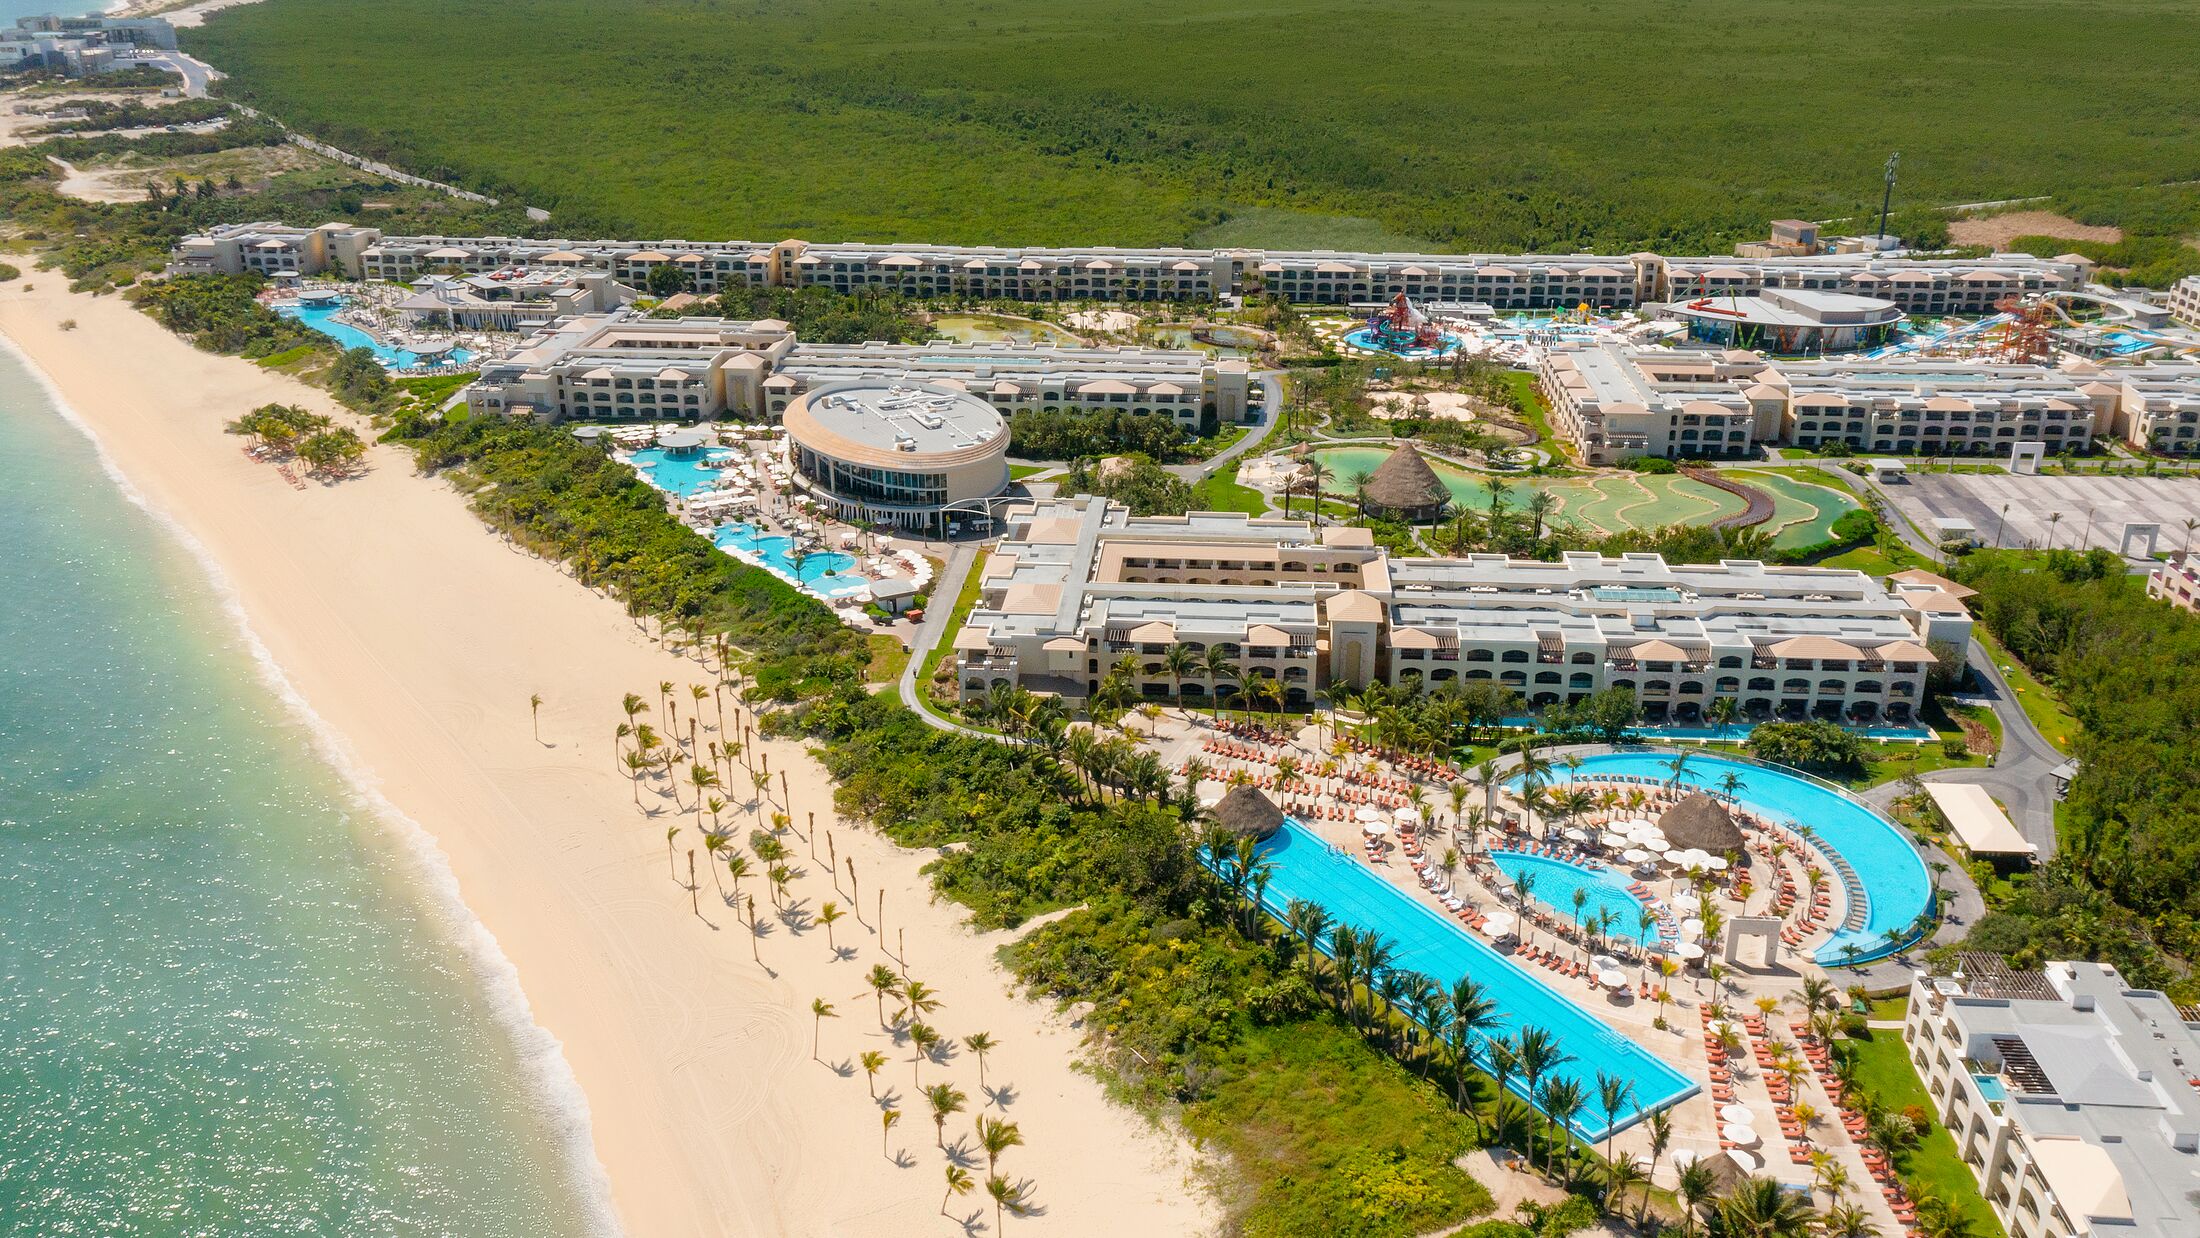 Moon Palace The Grand Cancun, architecture, Drone, Resort Aerial, Pools, Waterpark.Moon Palace The Grand Cancun Architecture